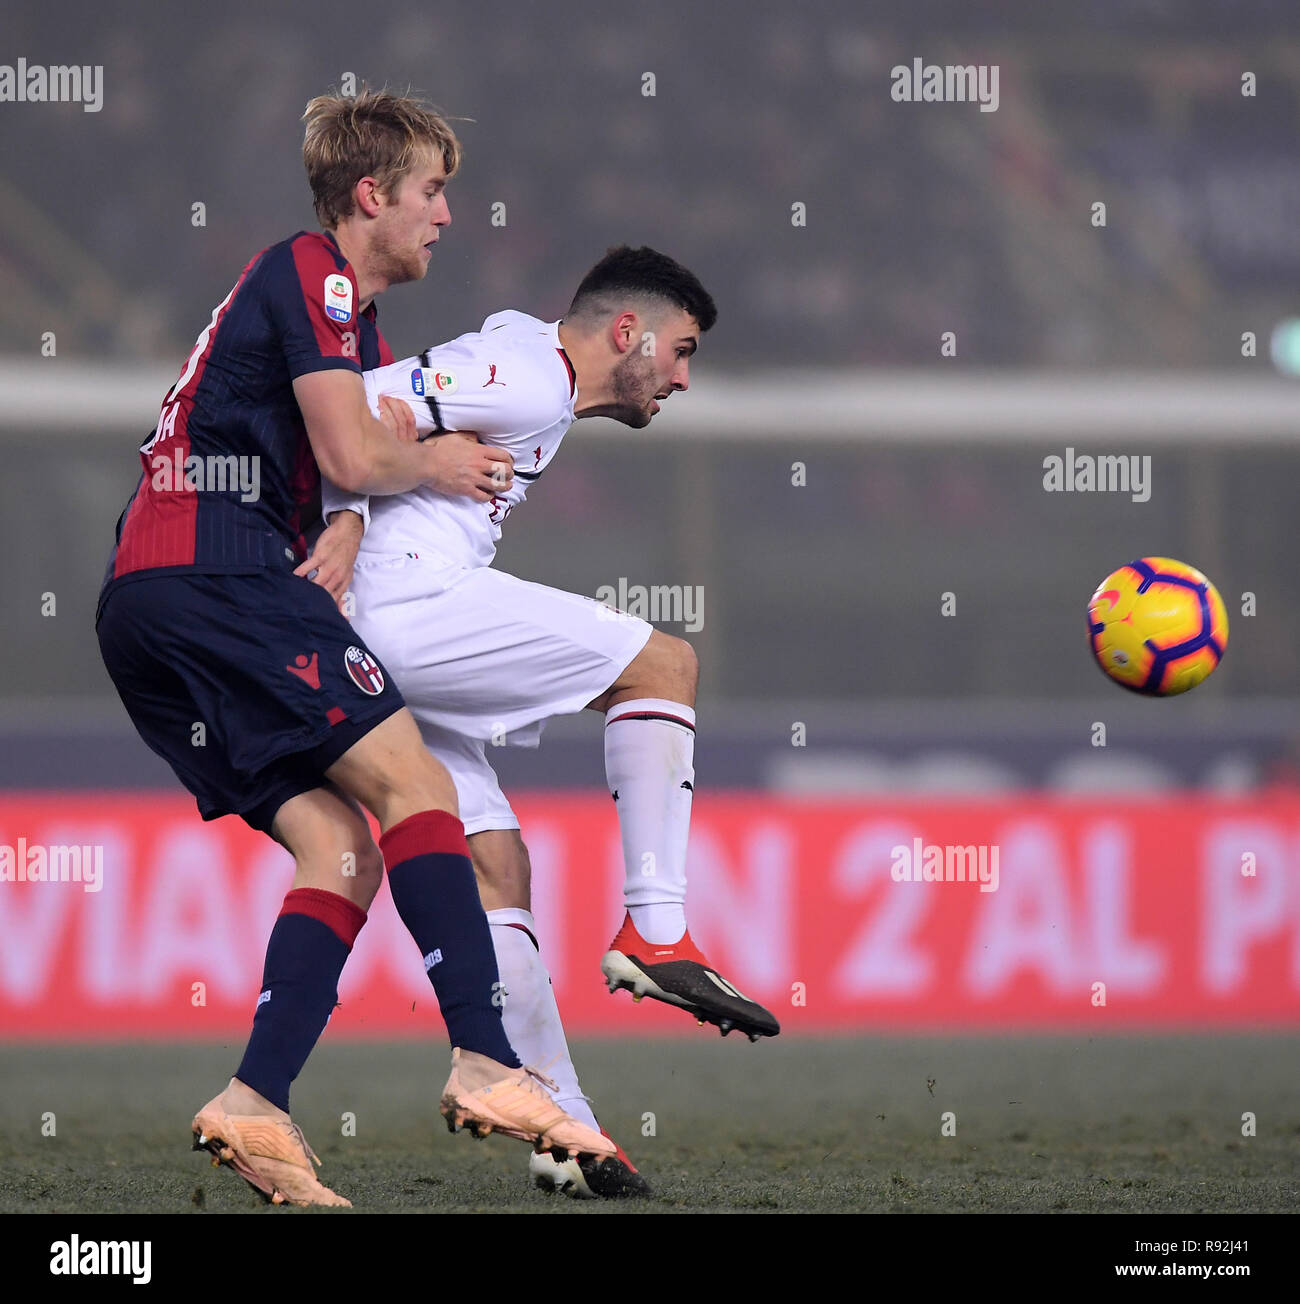 Bologna. 18th Dec, 2018. AC Milan's Patrick Cutrone (R) vies with Bologna's Filip Helander during the Serie A soccer match between Bologna and AC Milan in Bologna, Italy, Dec.18, 2018. The match ended in a 0-0 draw. Credit: Alberto Lingria/Xinhua/Alamy Live News Stock Photo